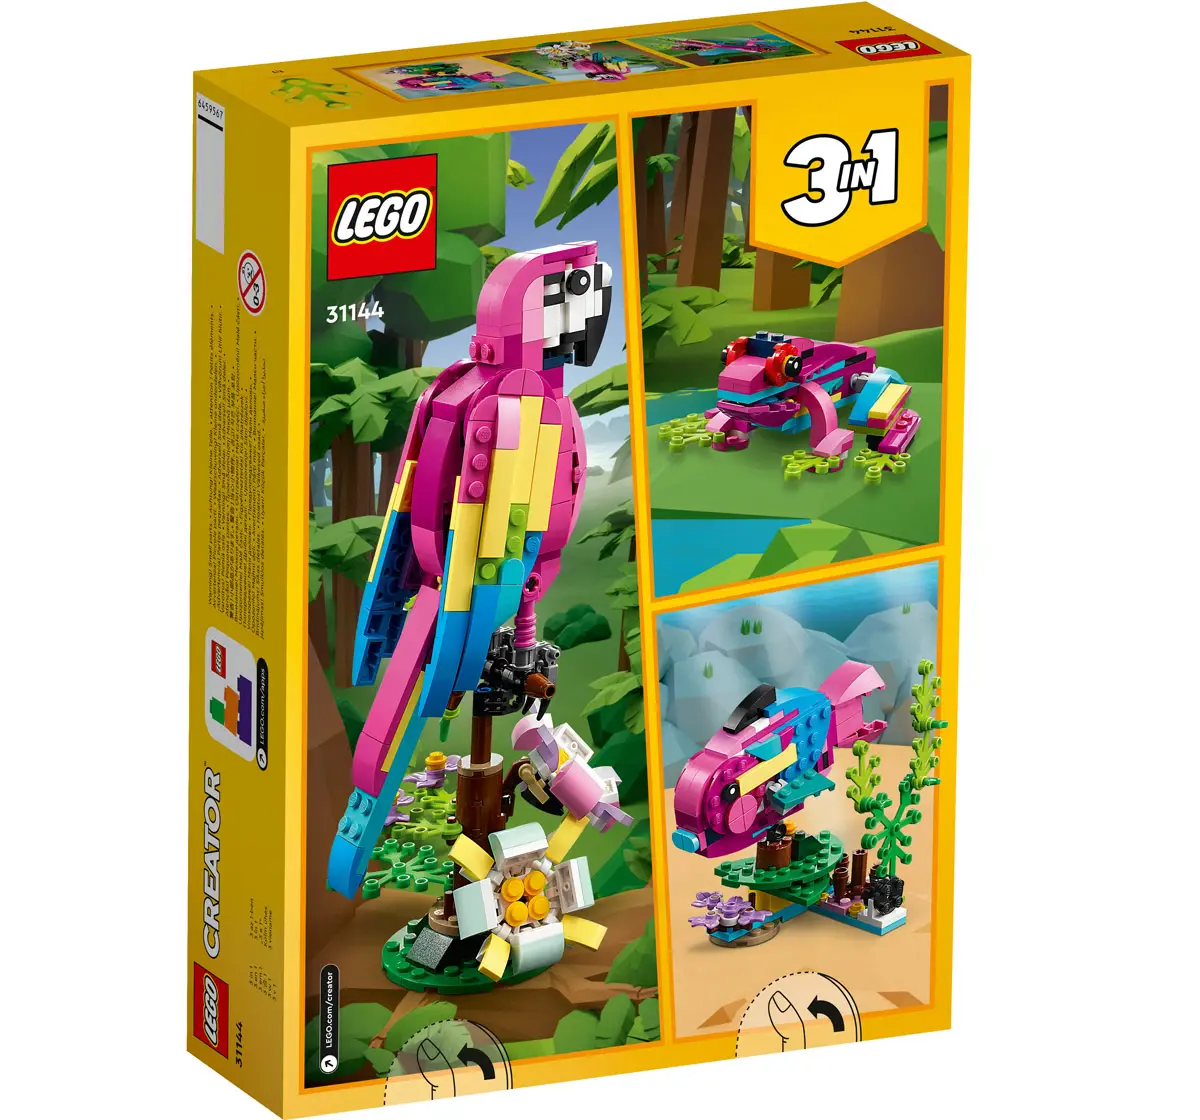 Lego Creator Exotic Pink Parrot 31144 Building Toy Set Multicolour For Kids Ages 7Y+ (253 Pieces)